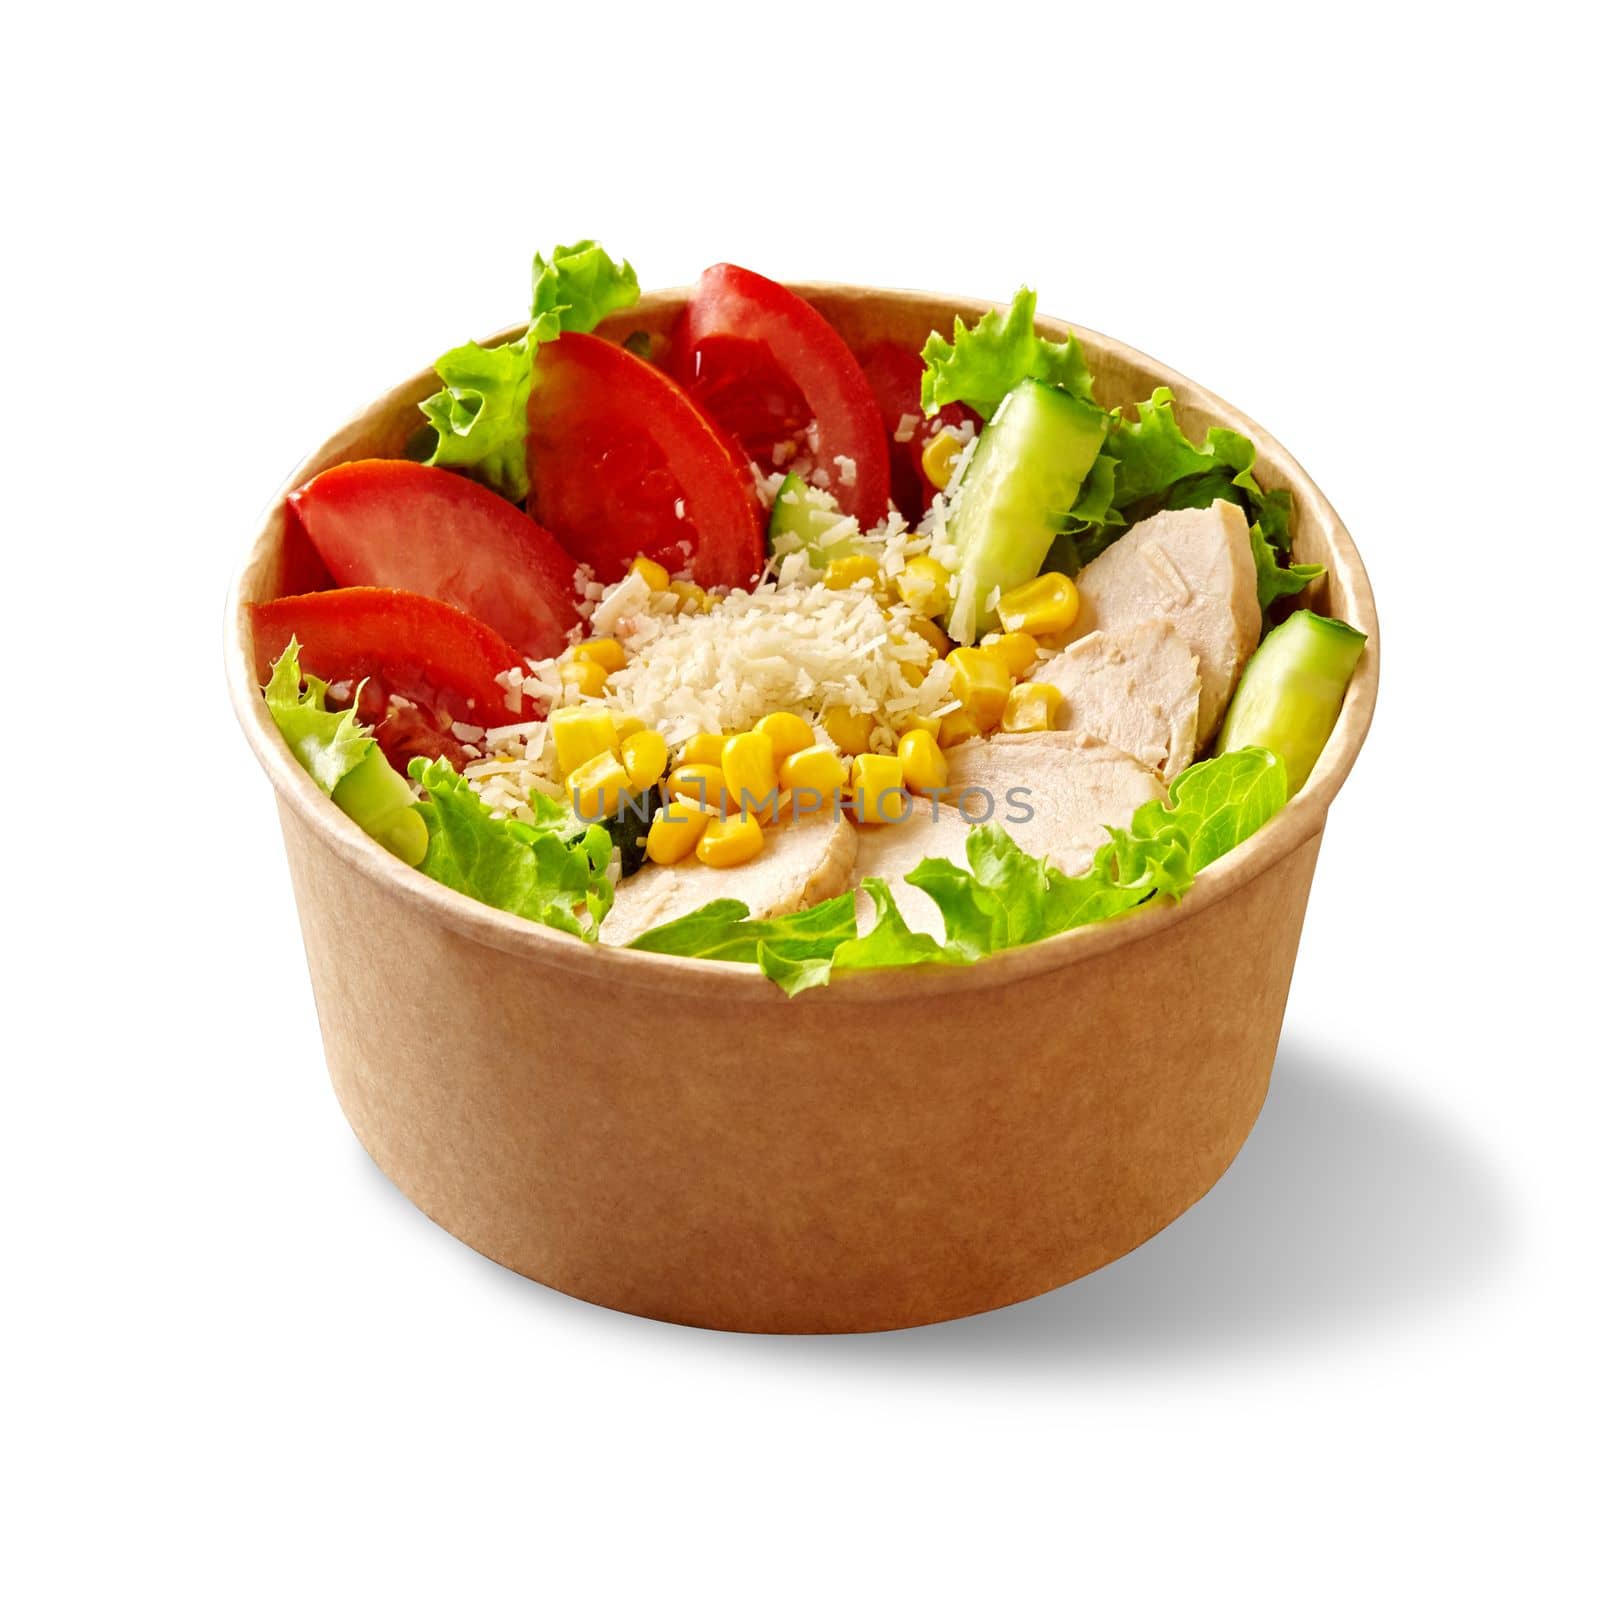 Salad of fresh lettuce leaves, chopped ripe tomato and cucumber with chicken fillet, corn kernels and grated parmesan in cardboard cup isolated on white background. Healthy snack. Delivery food